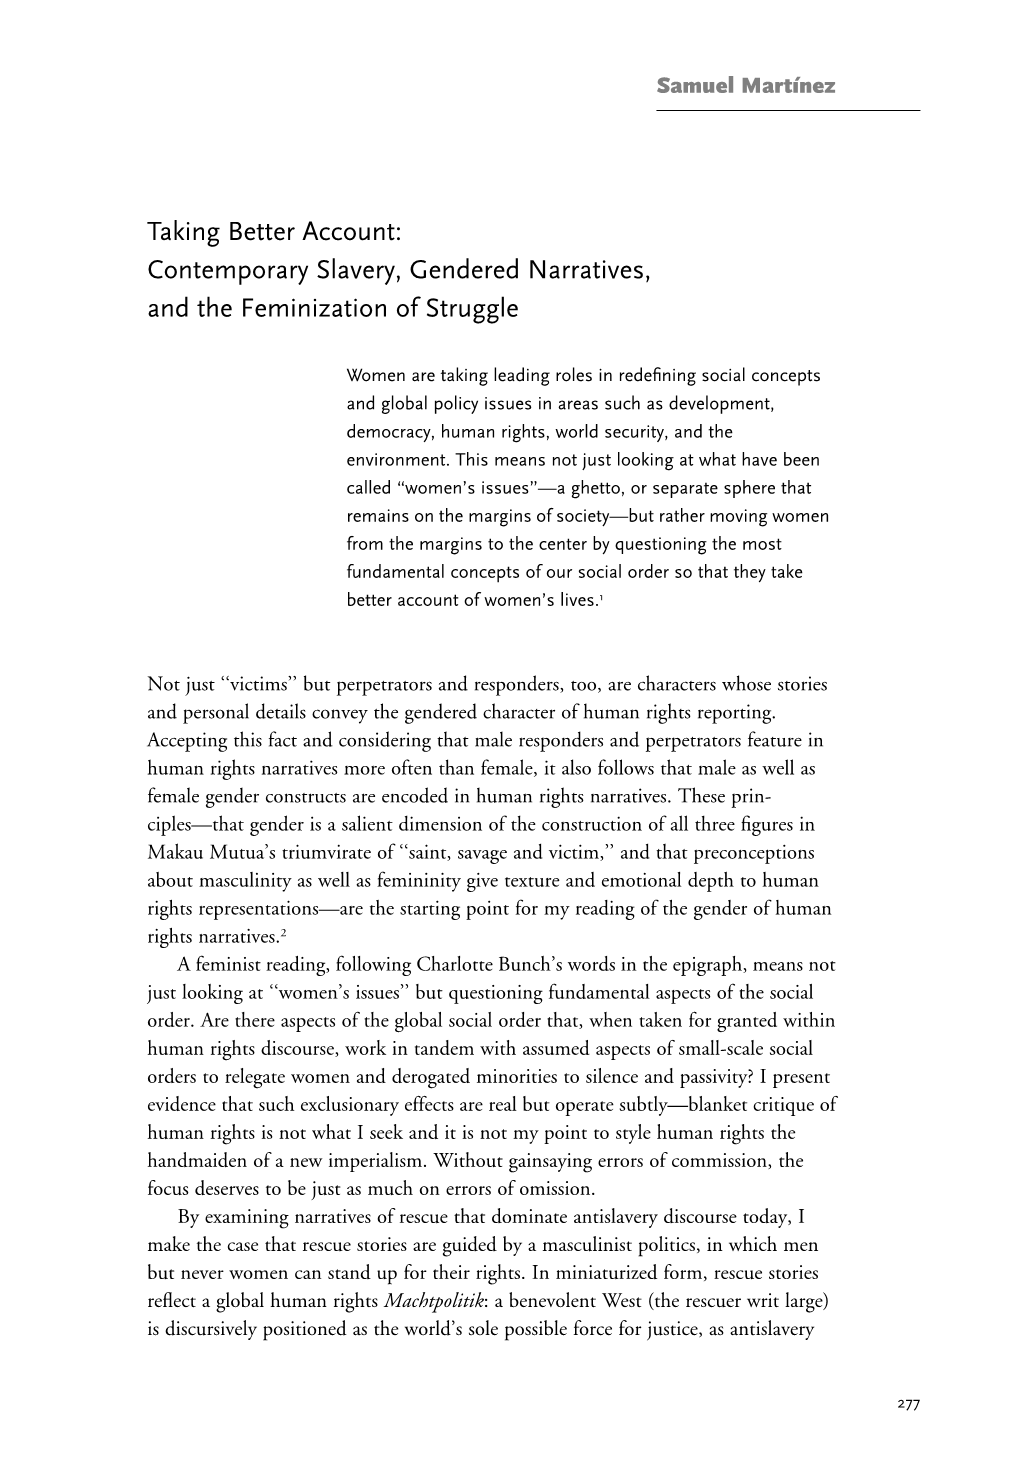 Taking Better Account: Contemporary Slavery, Gendered Narratives, and the Feminization of Struggle